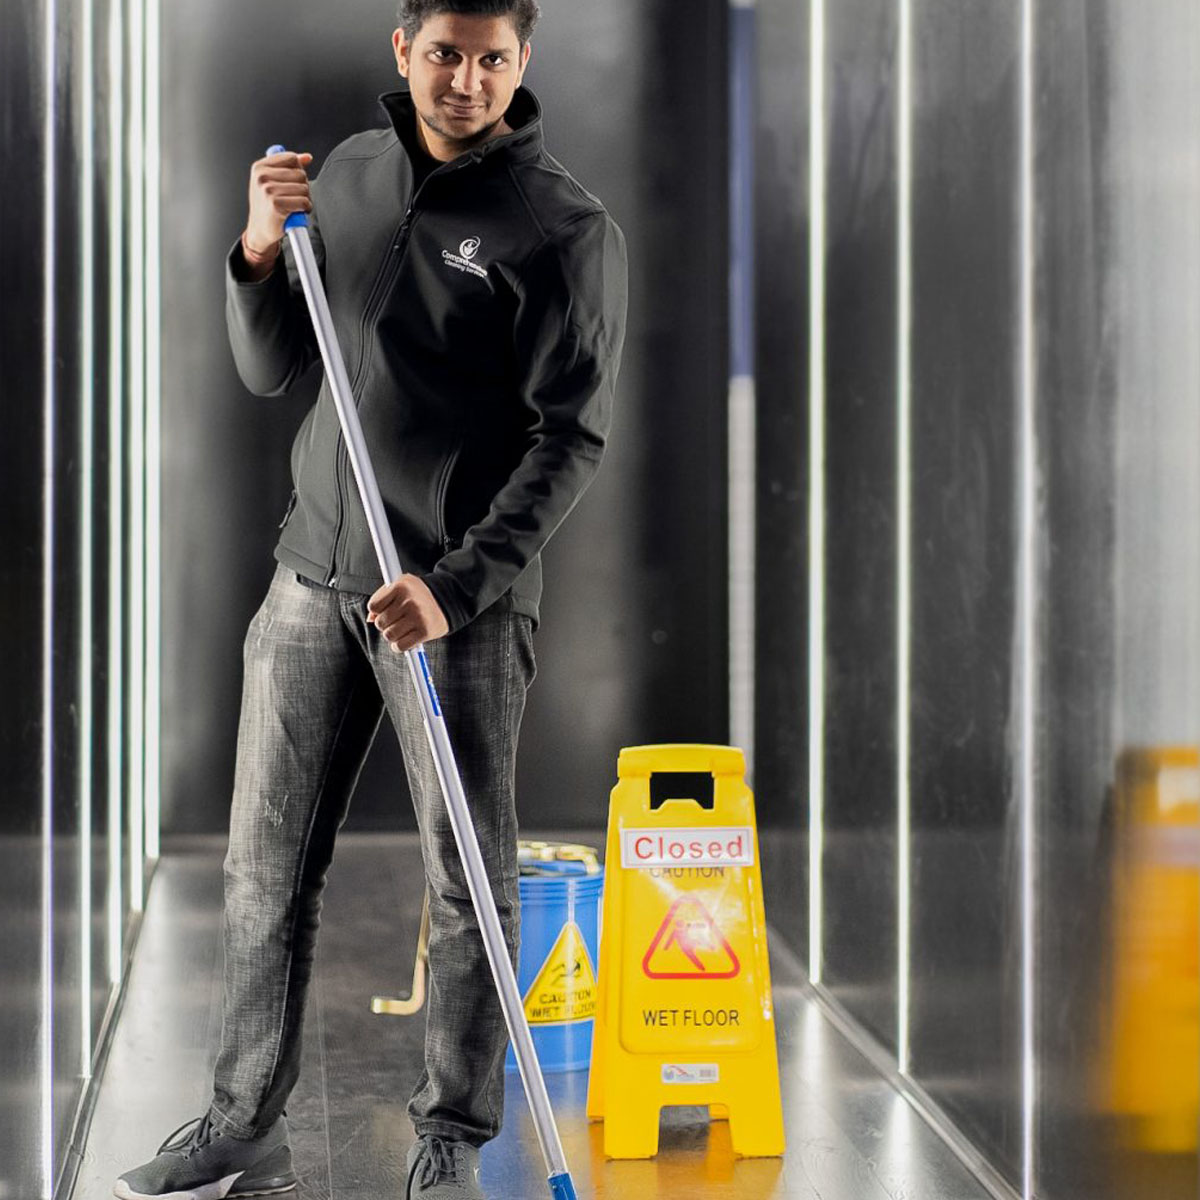 Pub & Club Cleaning services